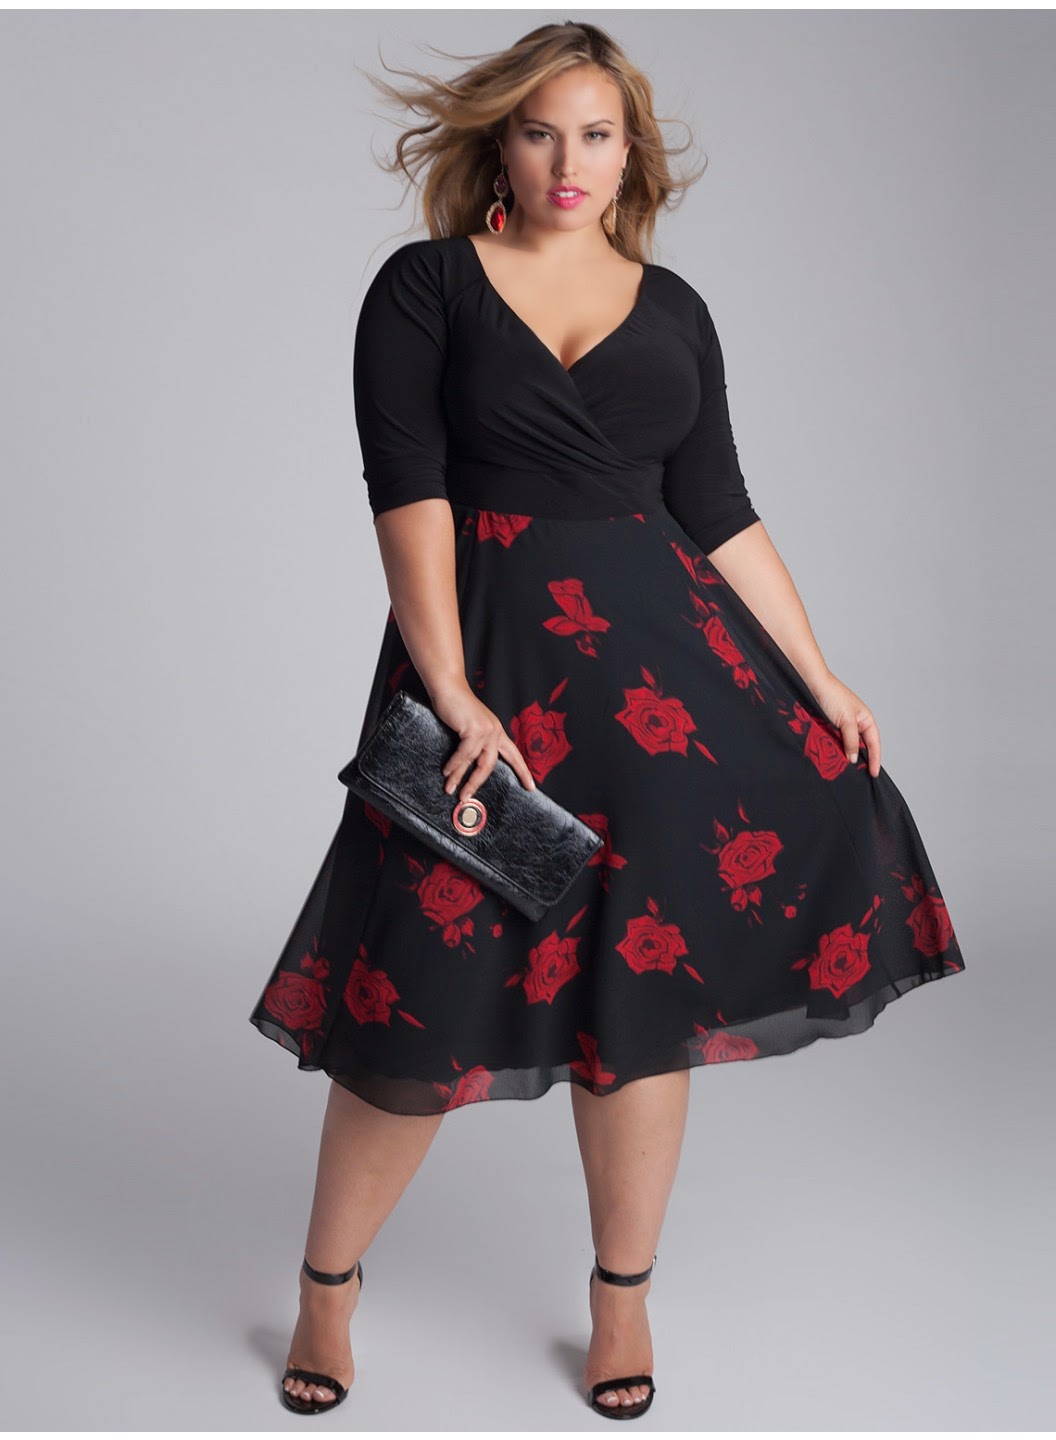 Style Cassentials: 10 Fall Floral Dresses to Wear NOW!!